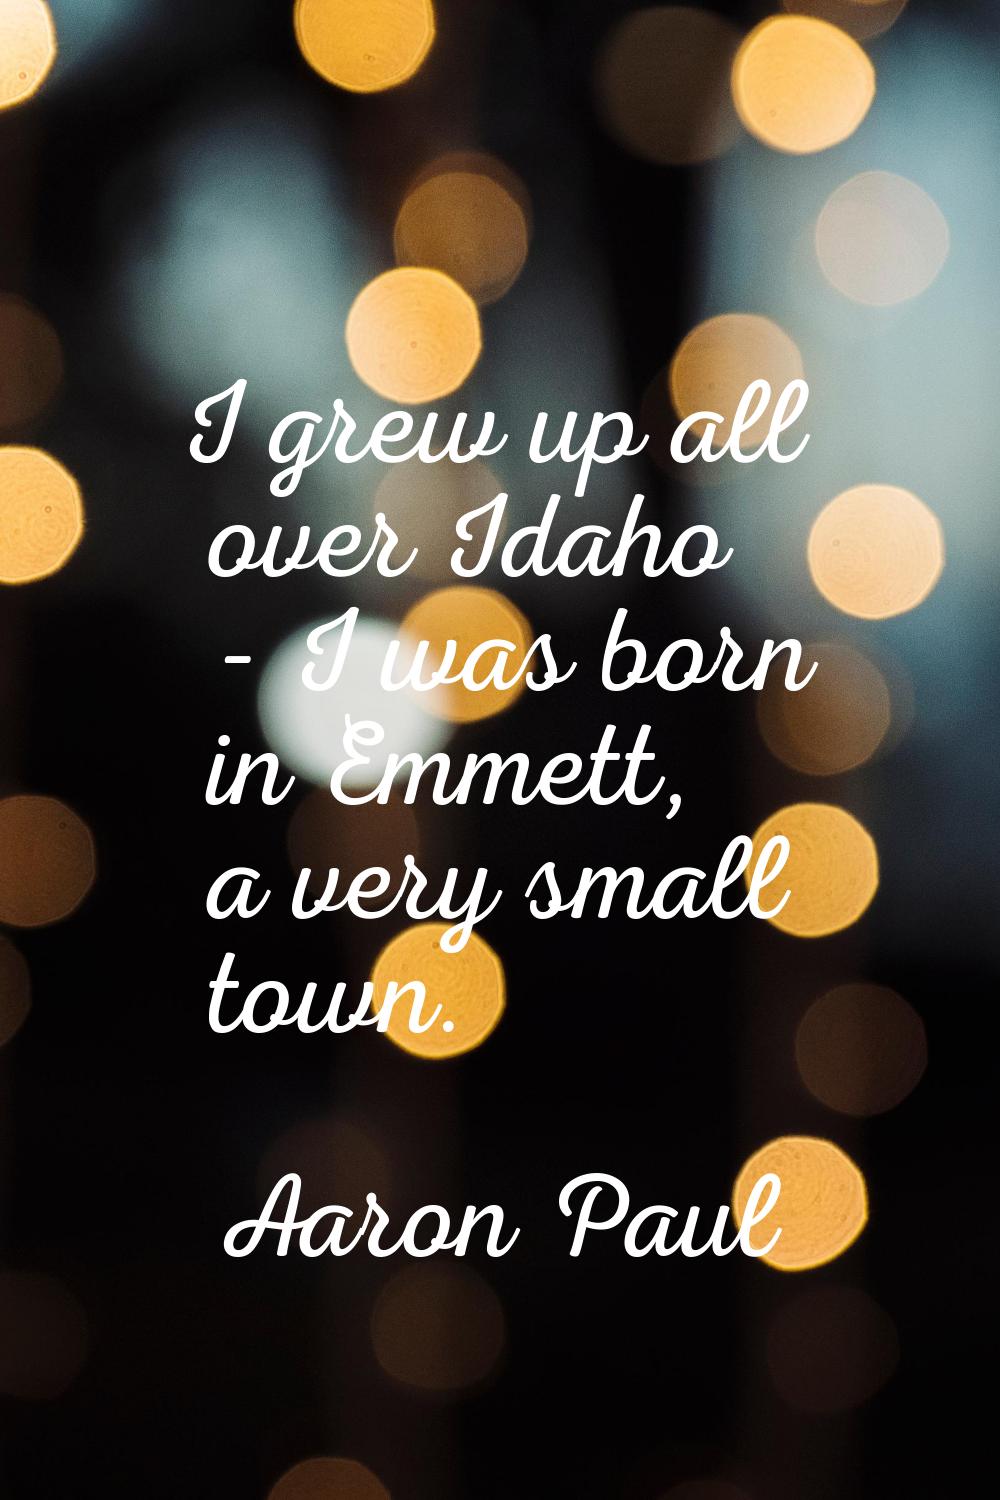 I grew up all over Idaho - I was born in Emmett, a very small town.